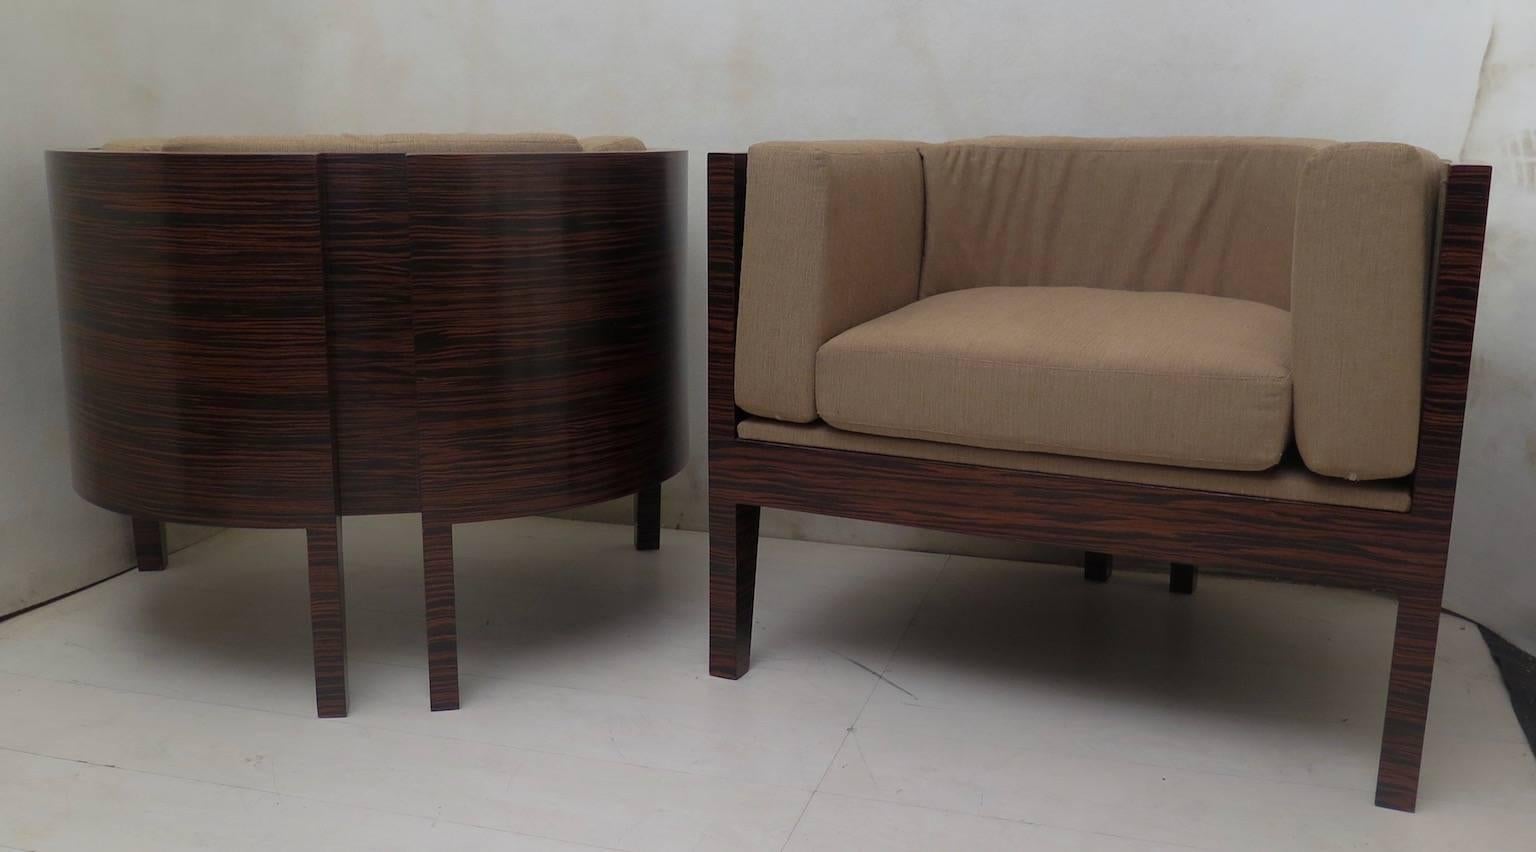 Pair of Italian Art Deco armchairs. All veneered in zebrano wood. Composed of a large wooden structure that runs all around the seat, and a series of cushions placed all around the backrest. Even the seat has a cushion with the same upholstery.